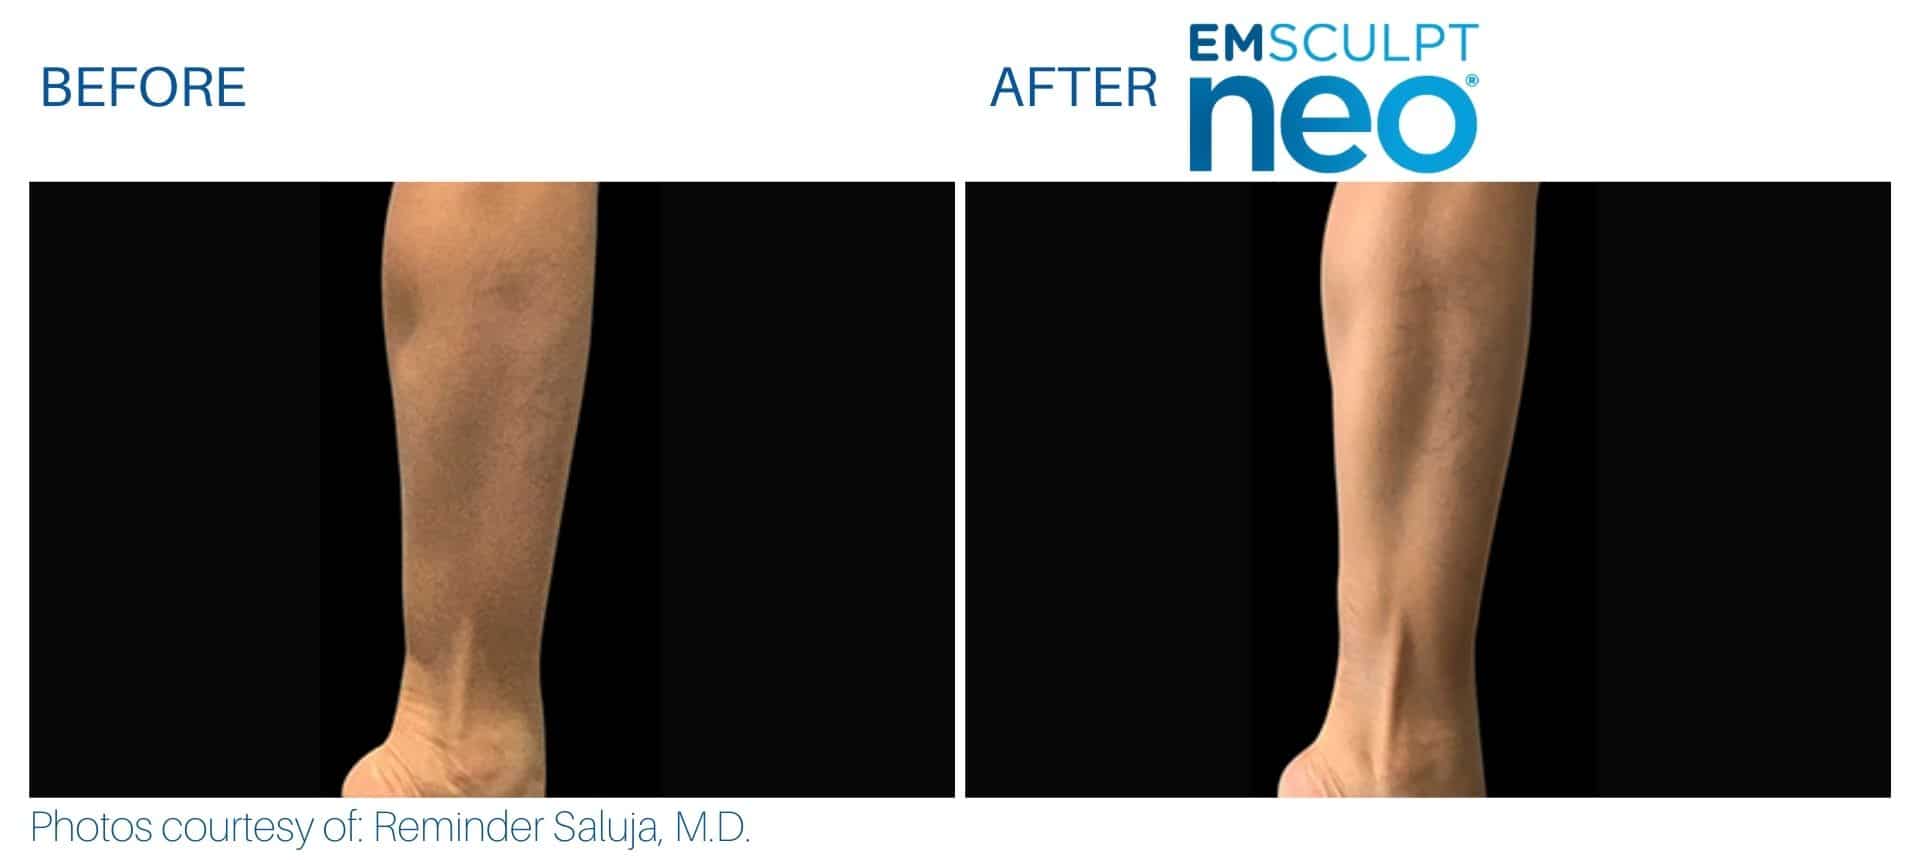 Emsculpt neo calf treatment before and after